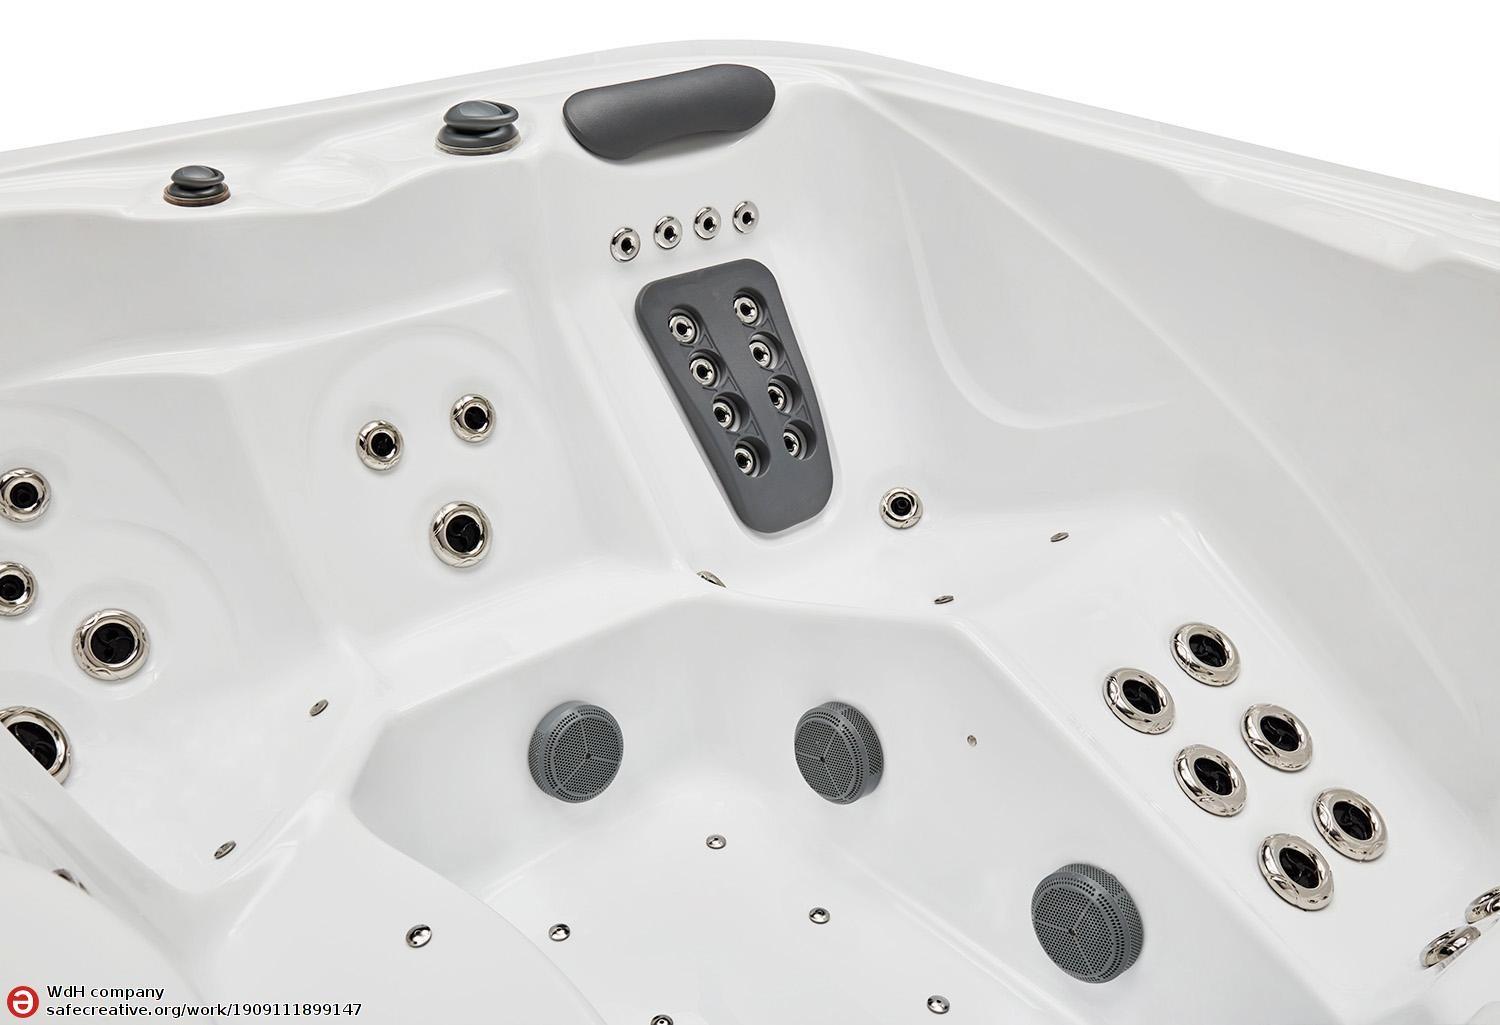 Spa jacuzzi exterior AT-009